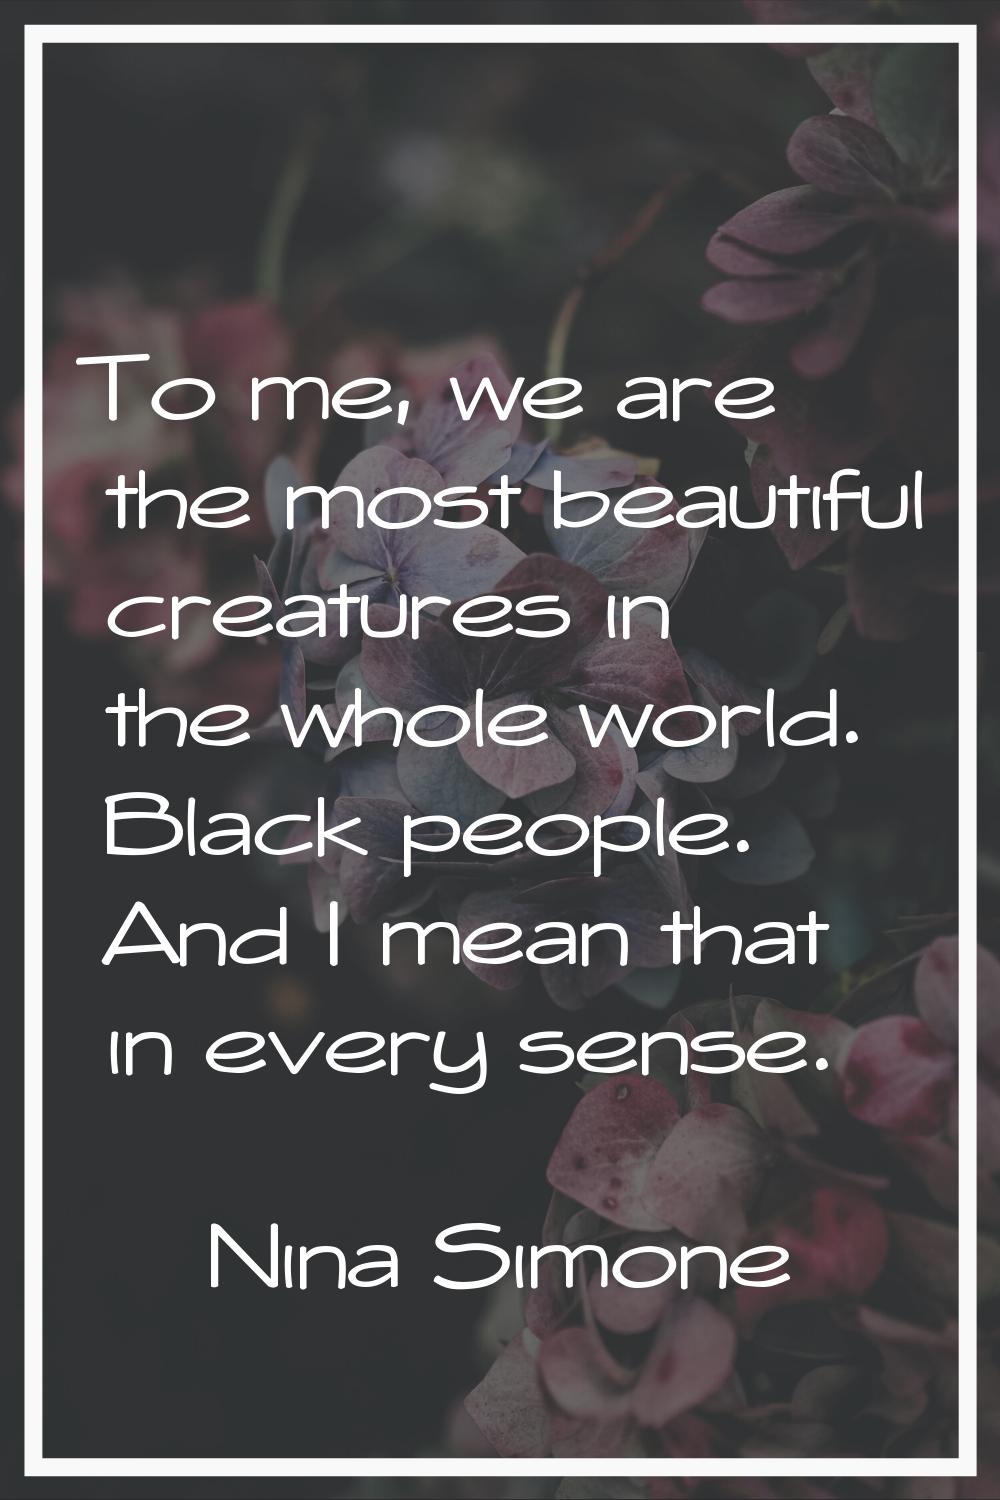 To me, we are the most beautiful creatures in the whole world. Black people. And I mean that in eve